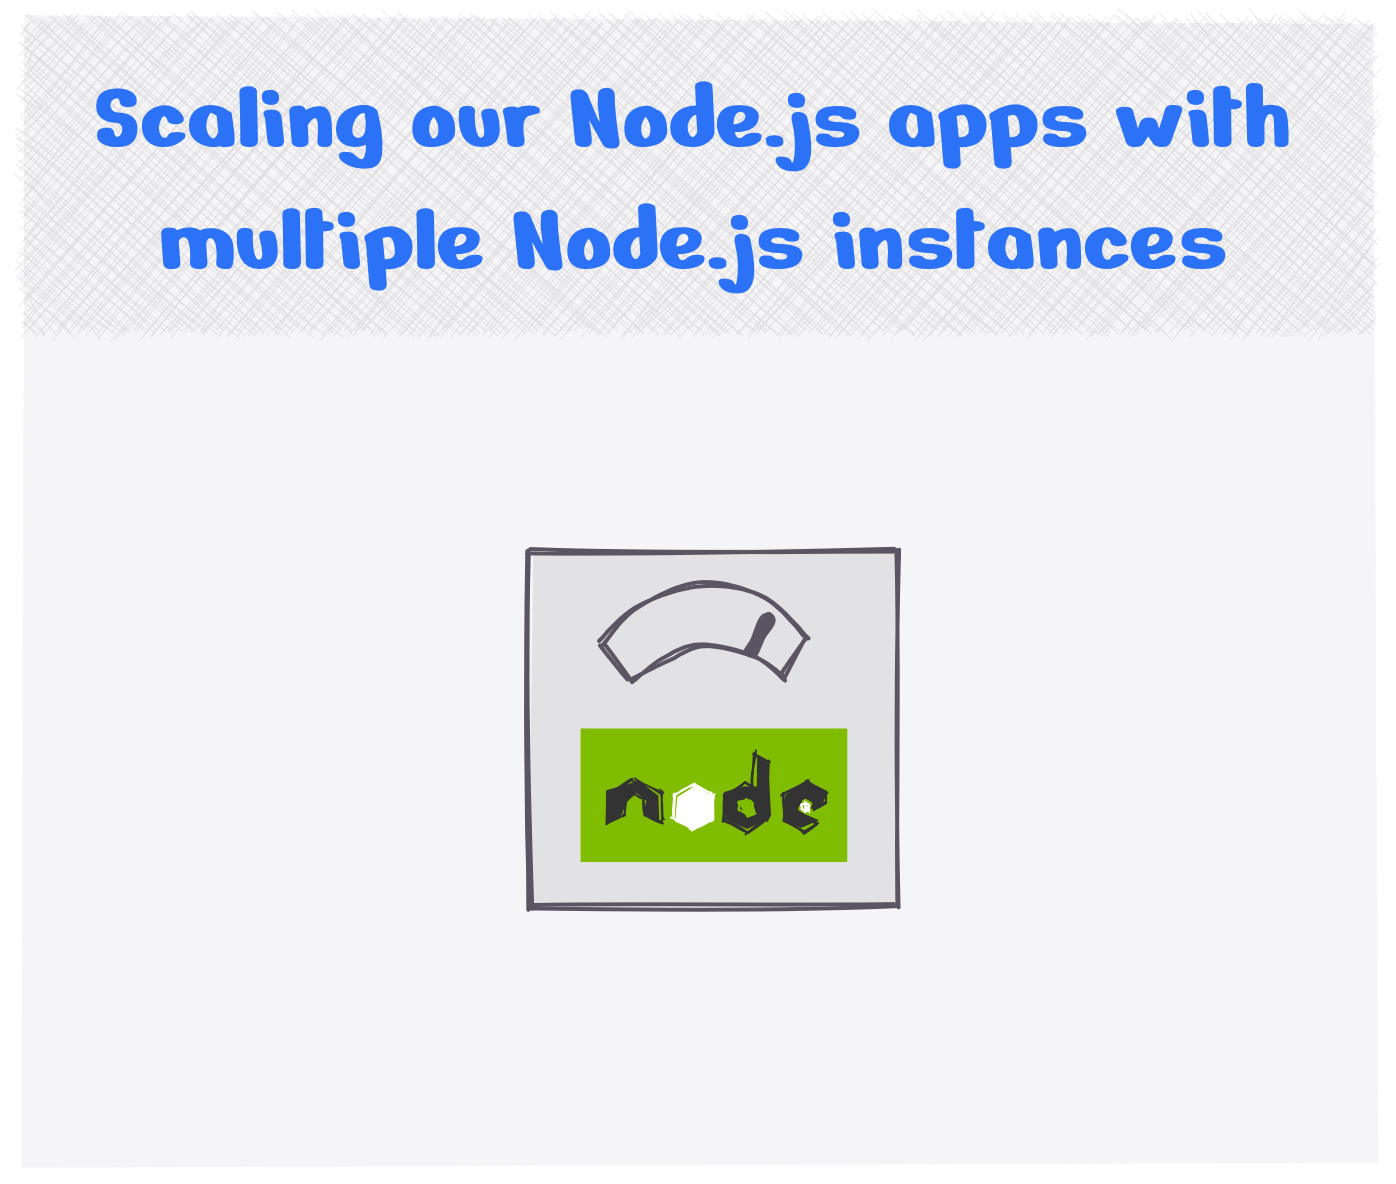 How do we scale our Node.js applications with multiple Node instances?